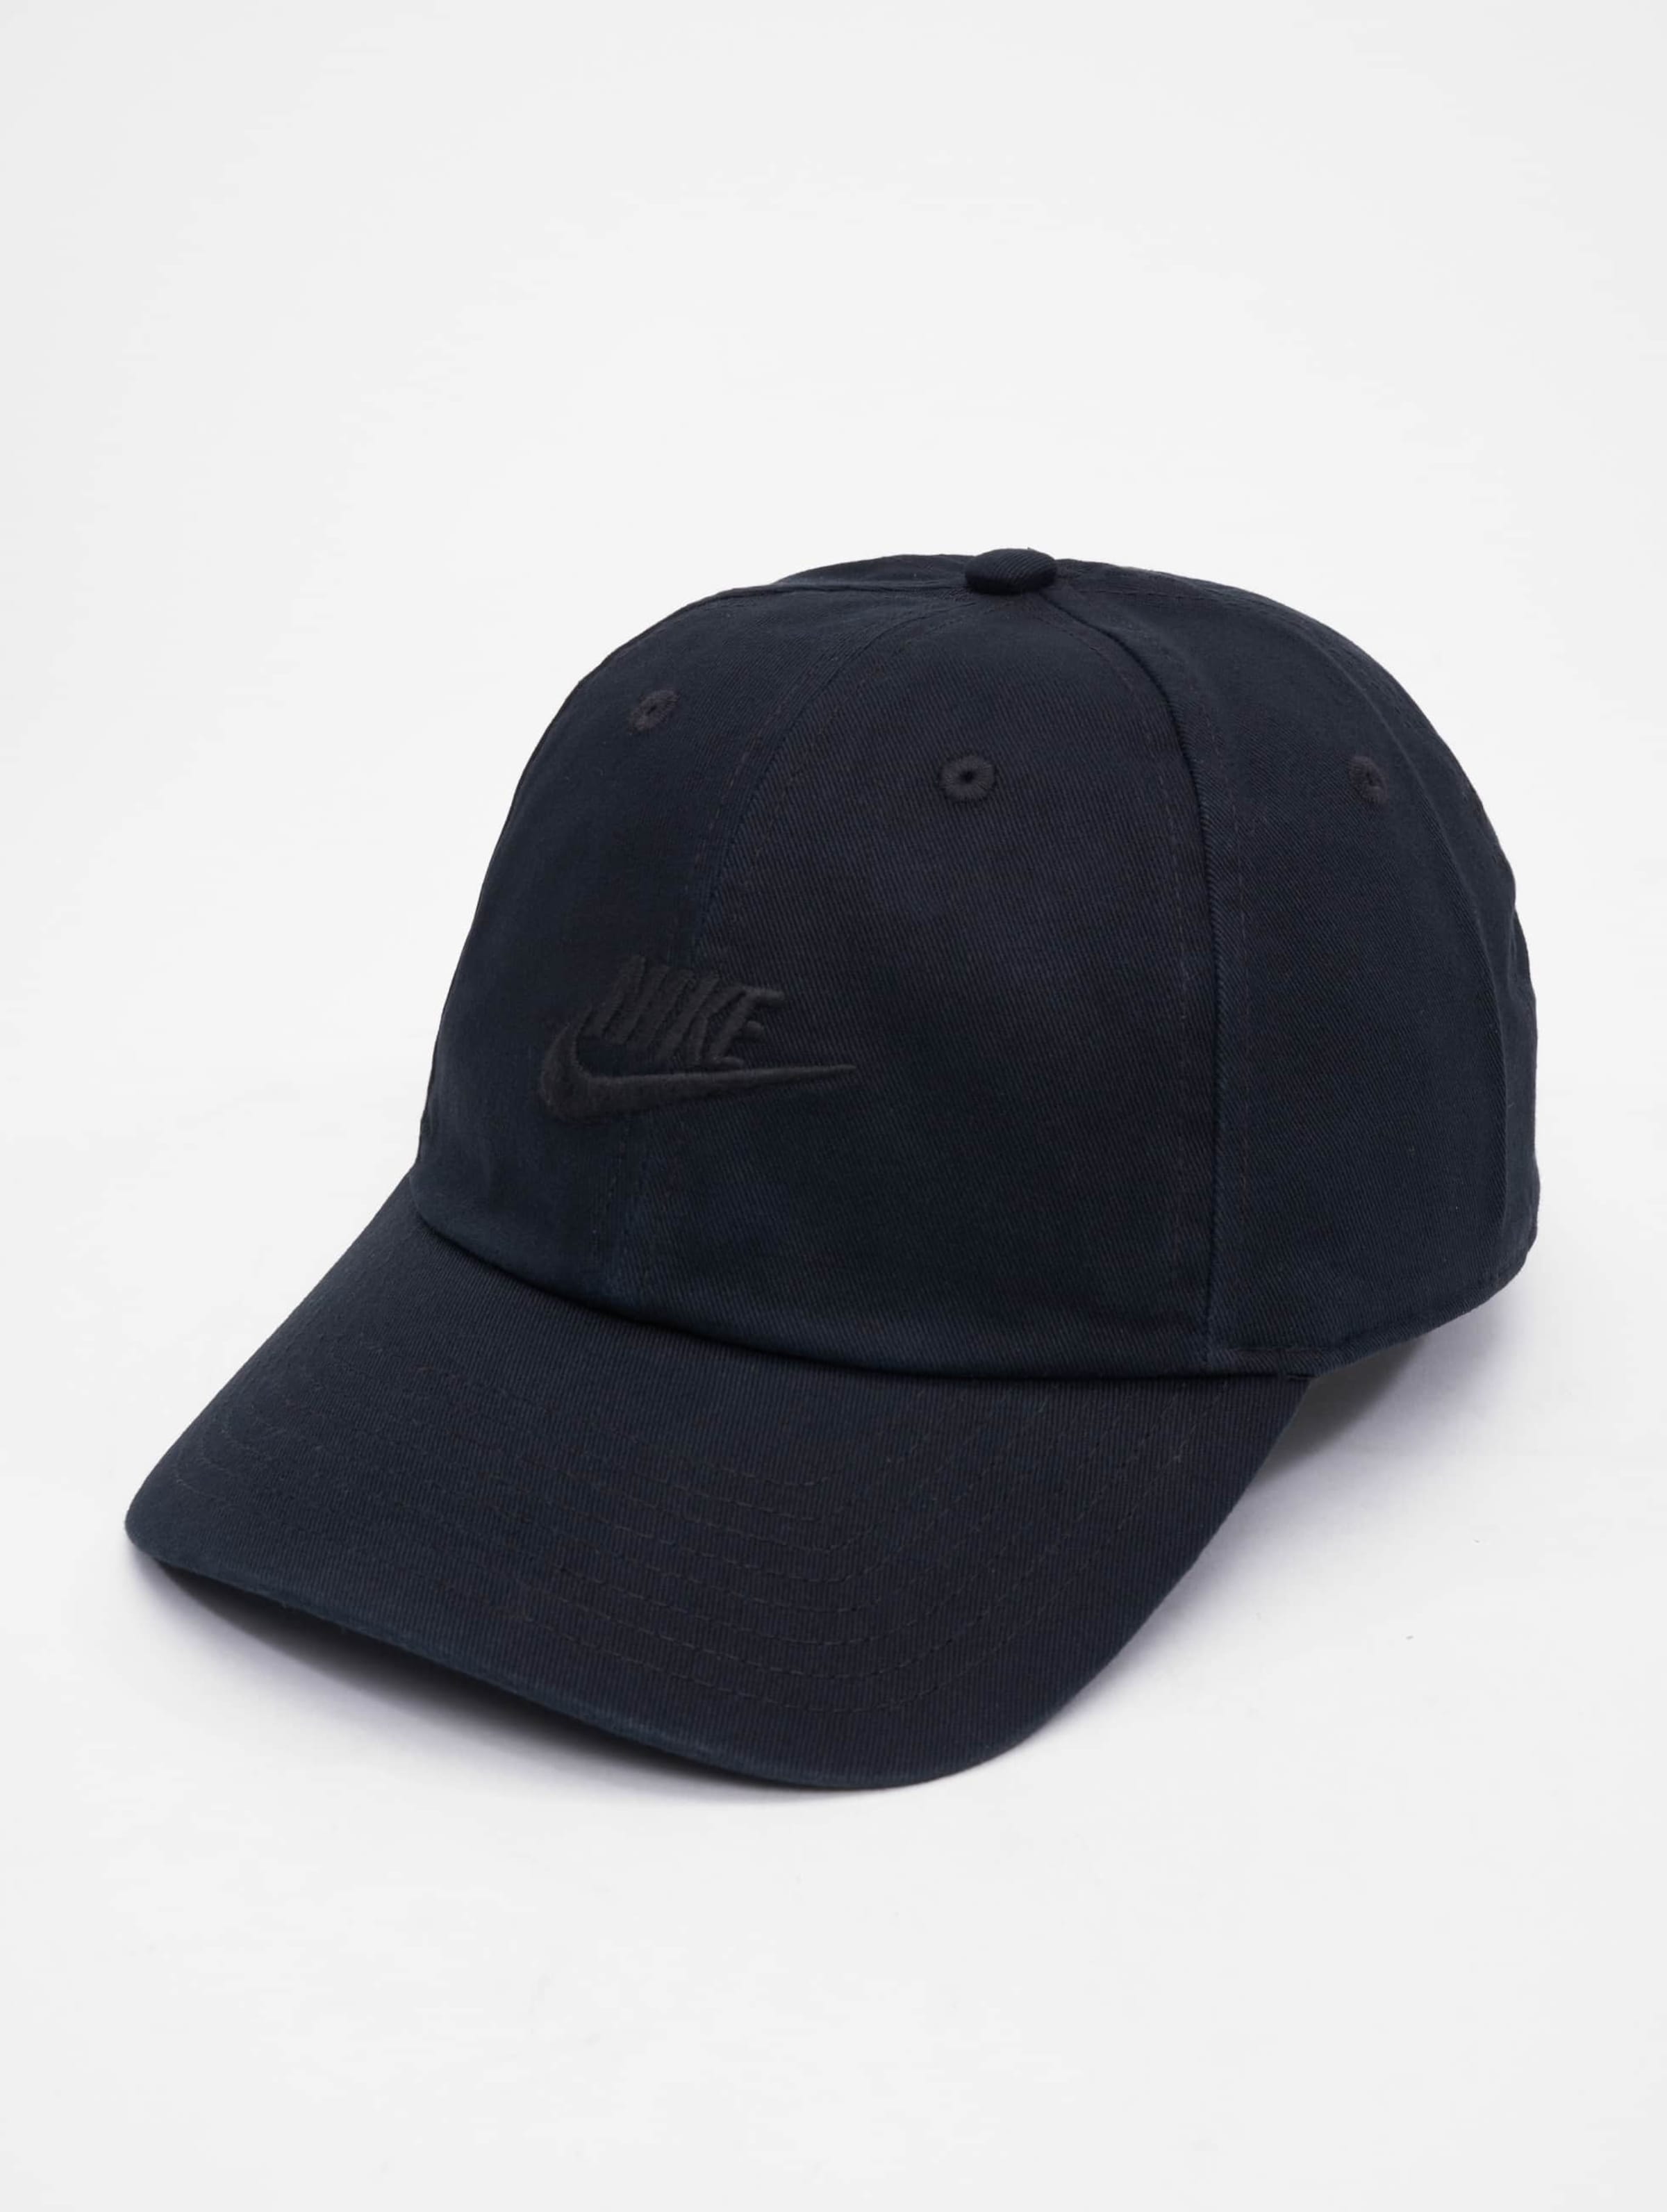 Order Nike Caps online with the lowest price guarantee